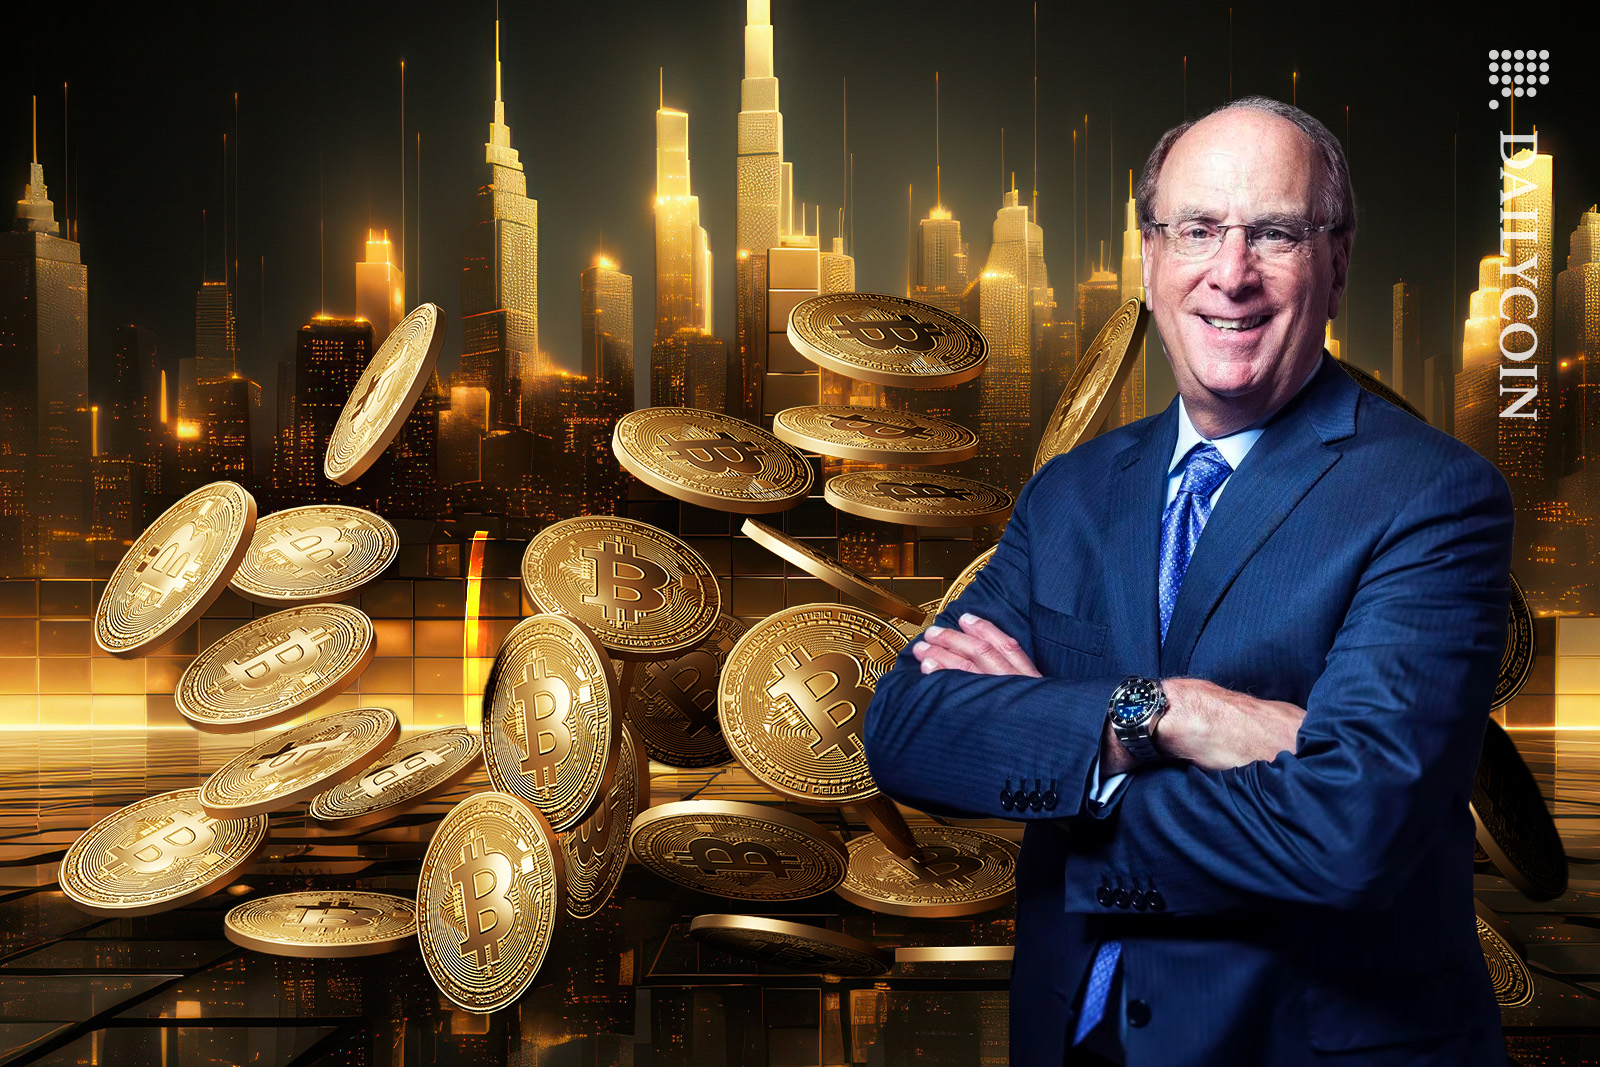 Larry Fink with in his golden empire with plenty of Bitcoins.